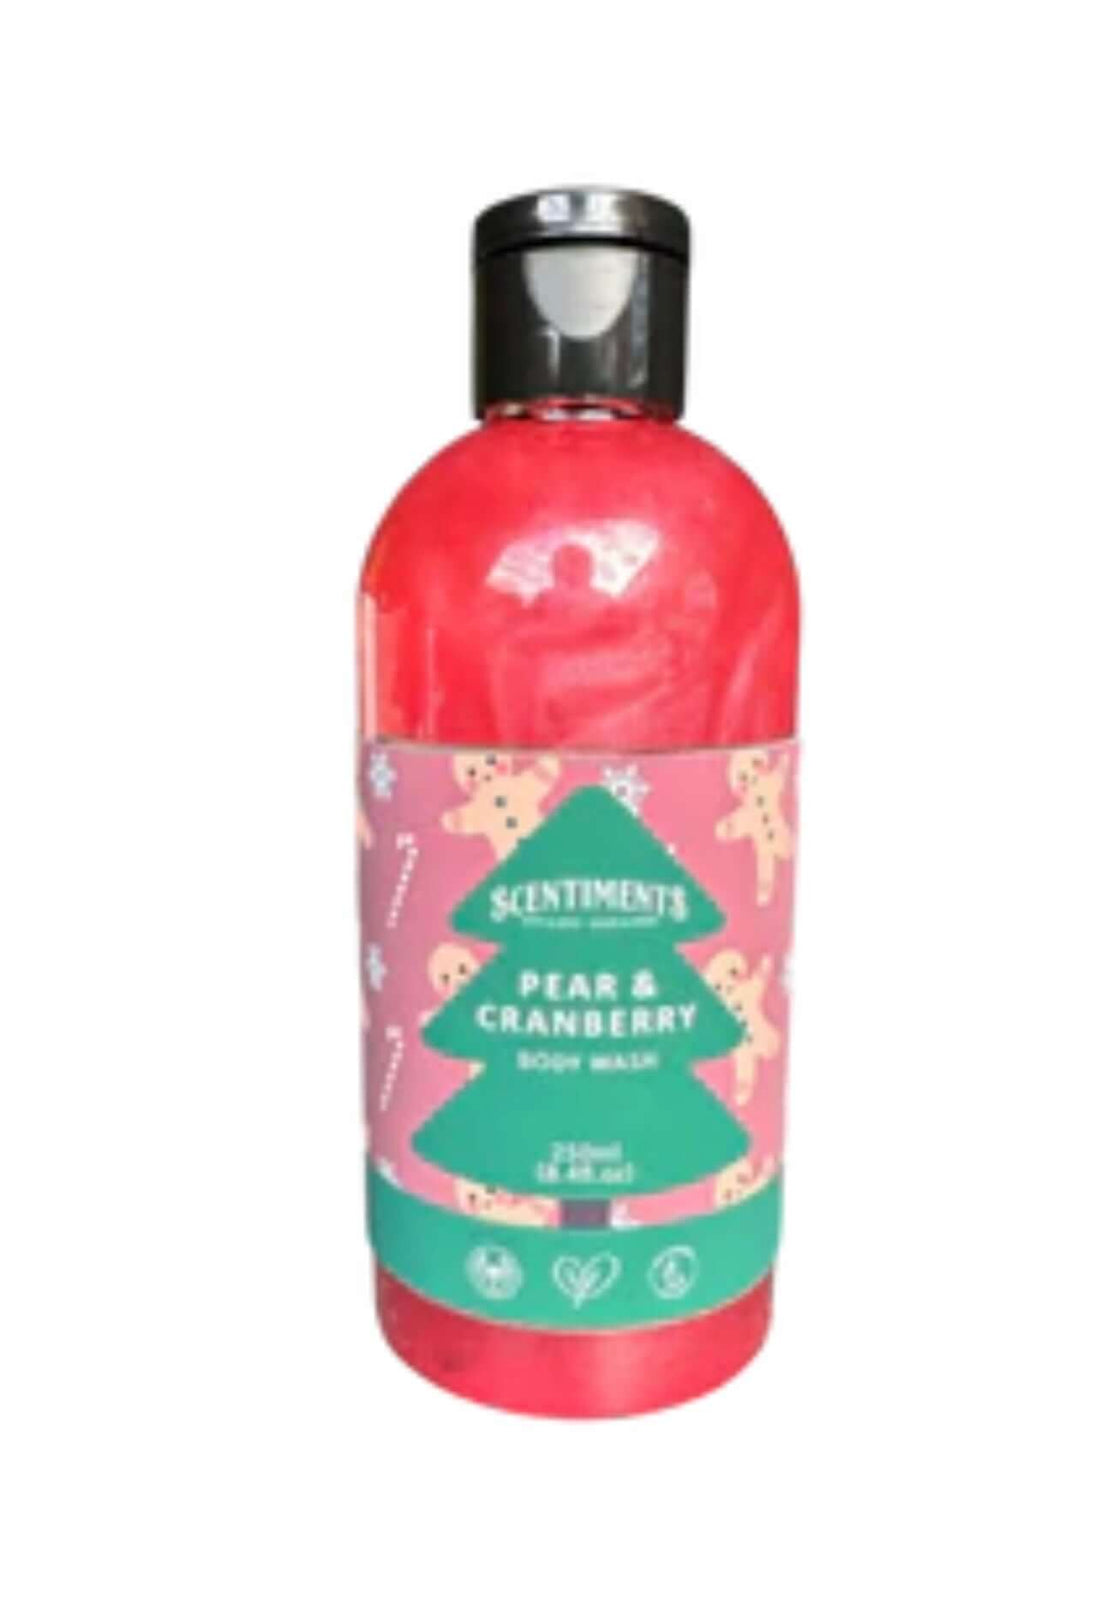 Pear and Cranberry Body Wash